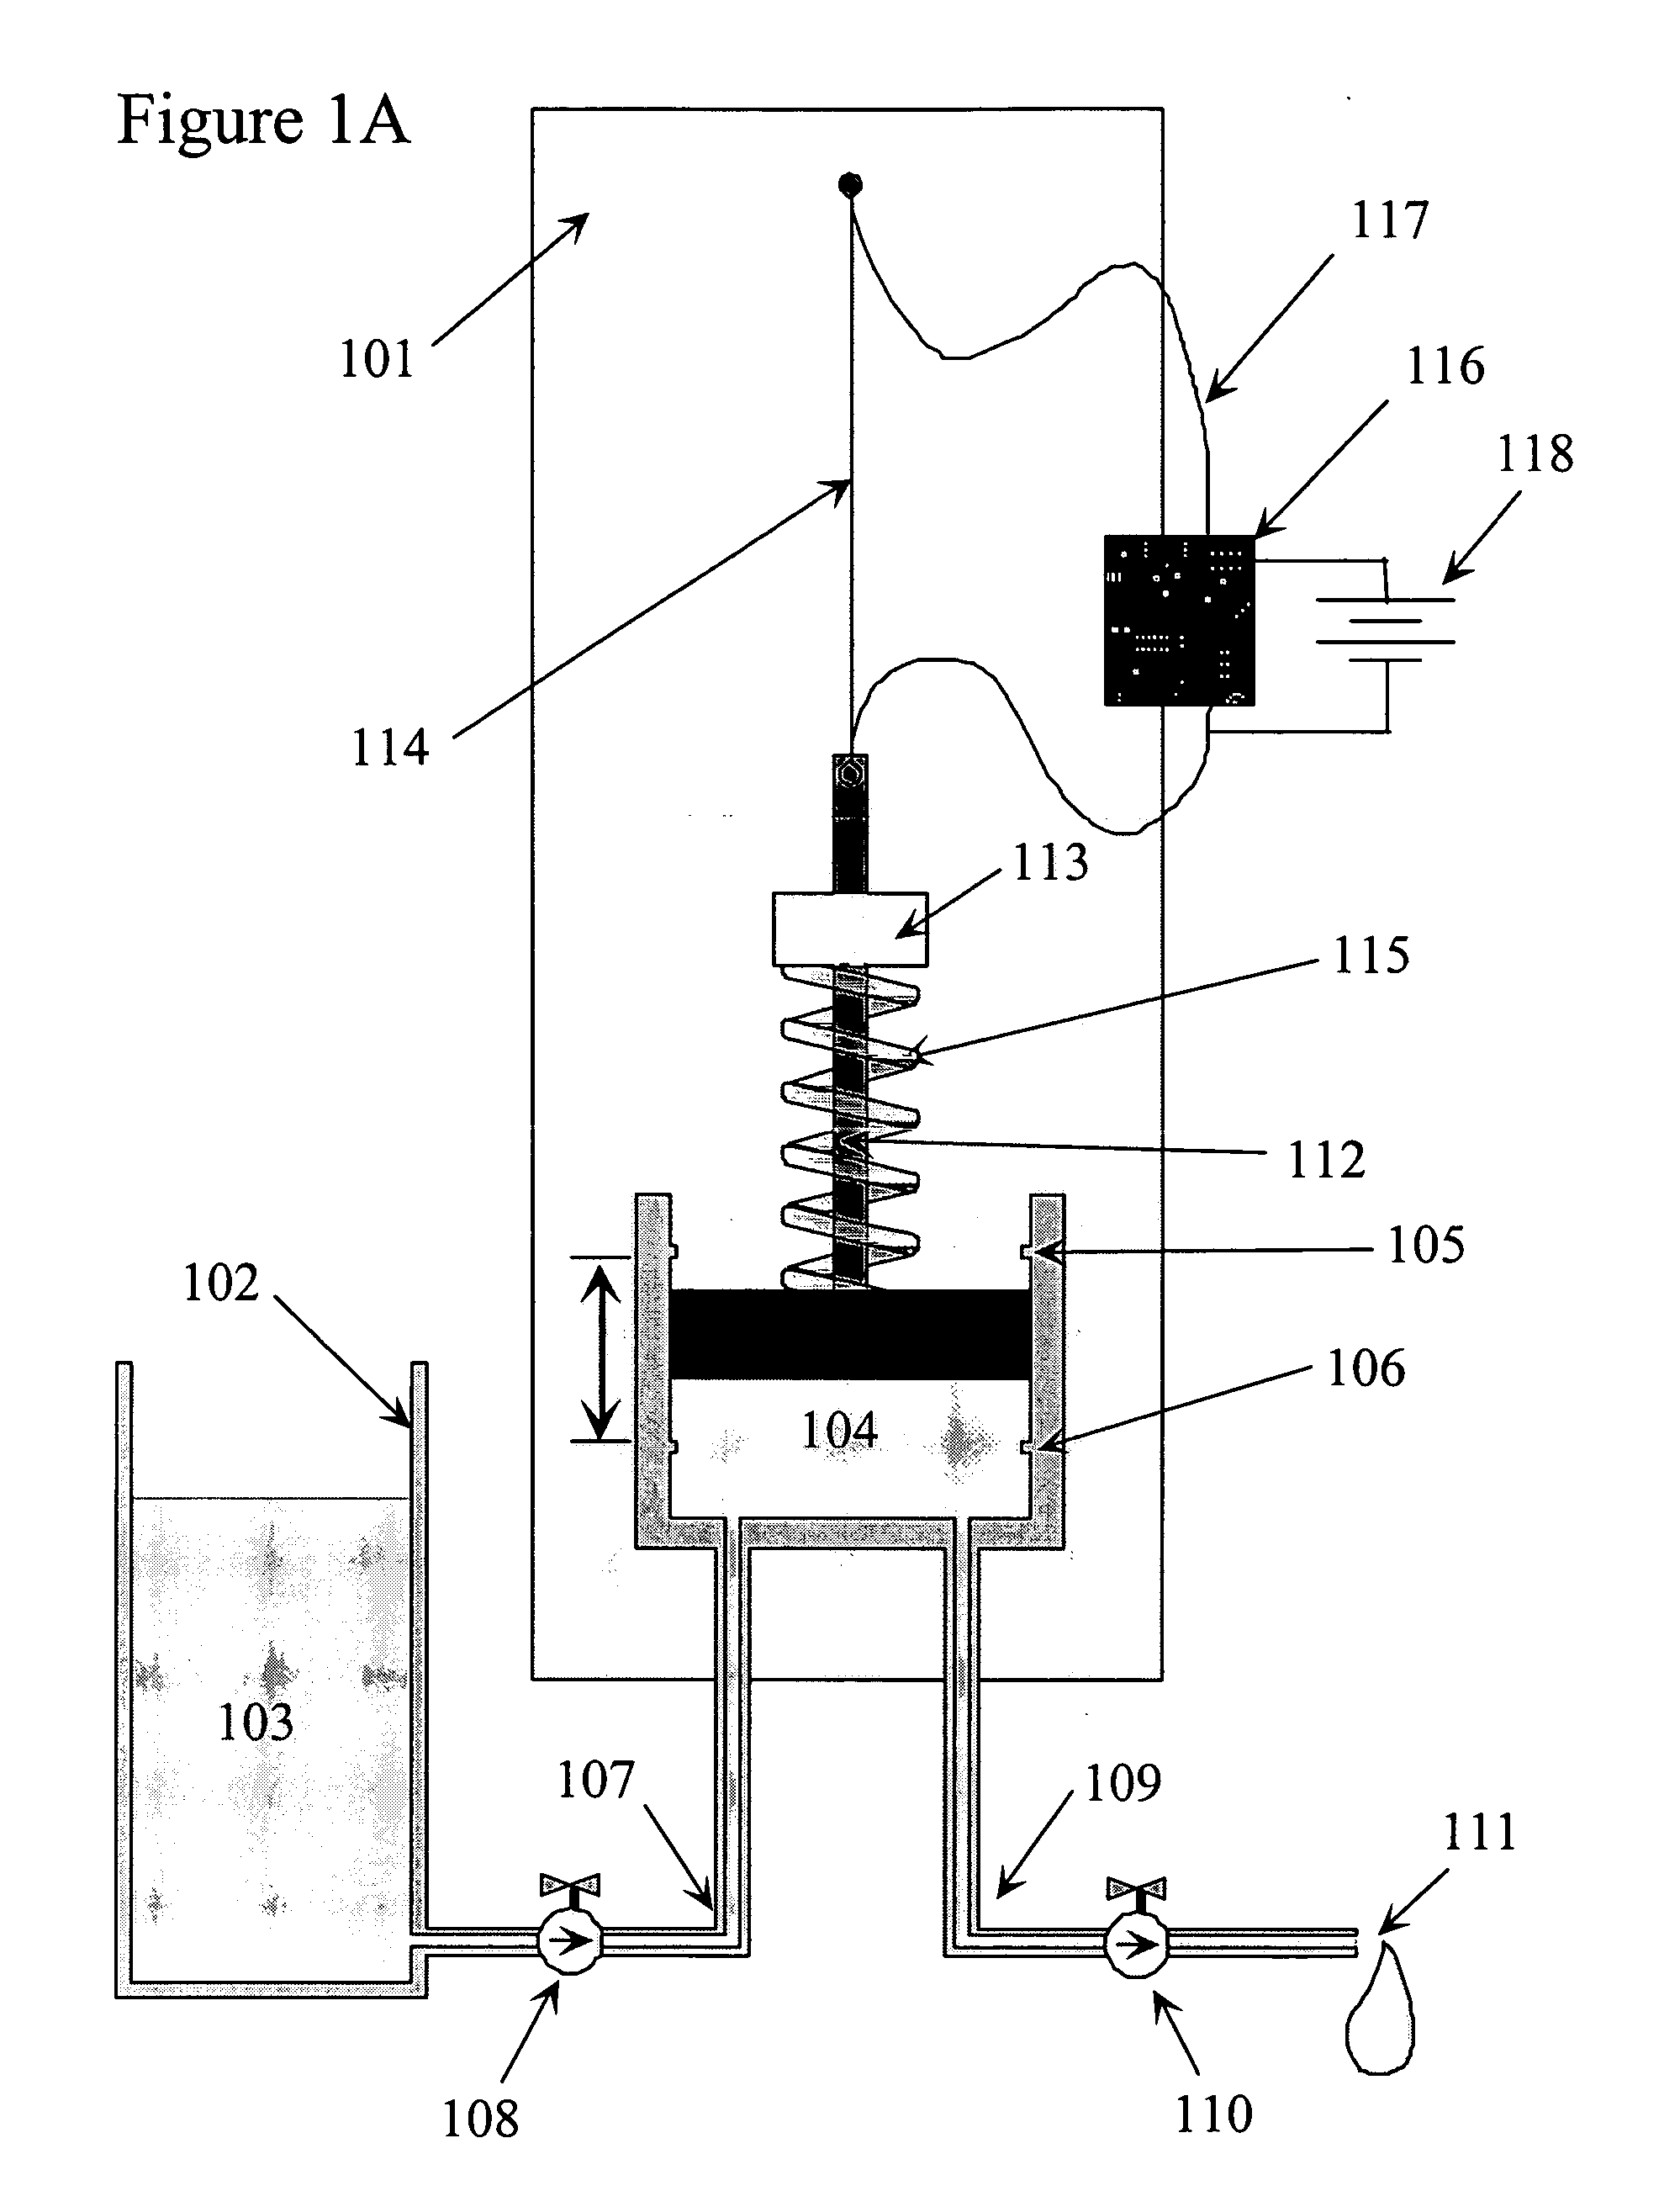 Fluid delivery device, system and method